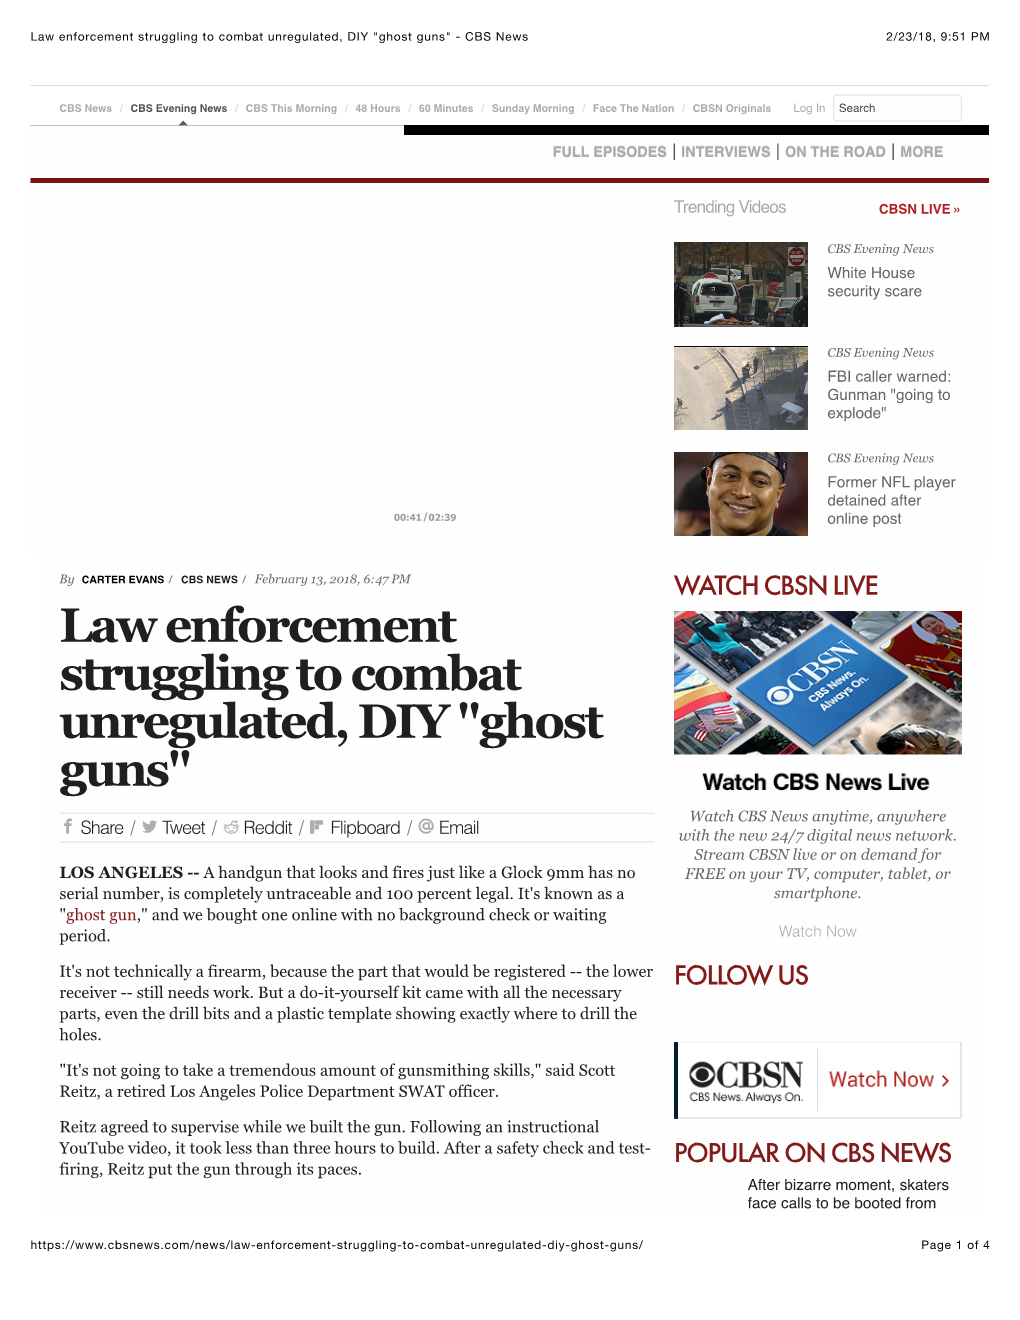 Law Enforcement Struggling to Combat Unregulated, DIY "Ghost Guns" - CBS News 2/23/18, 9:51 PM